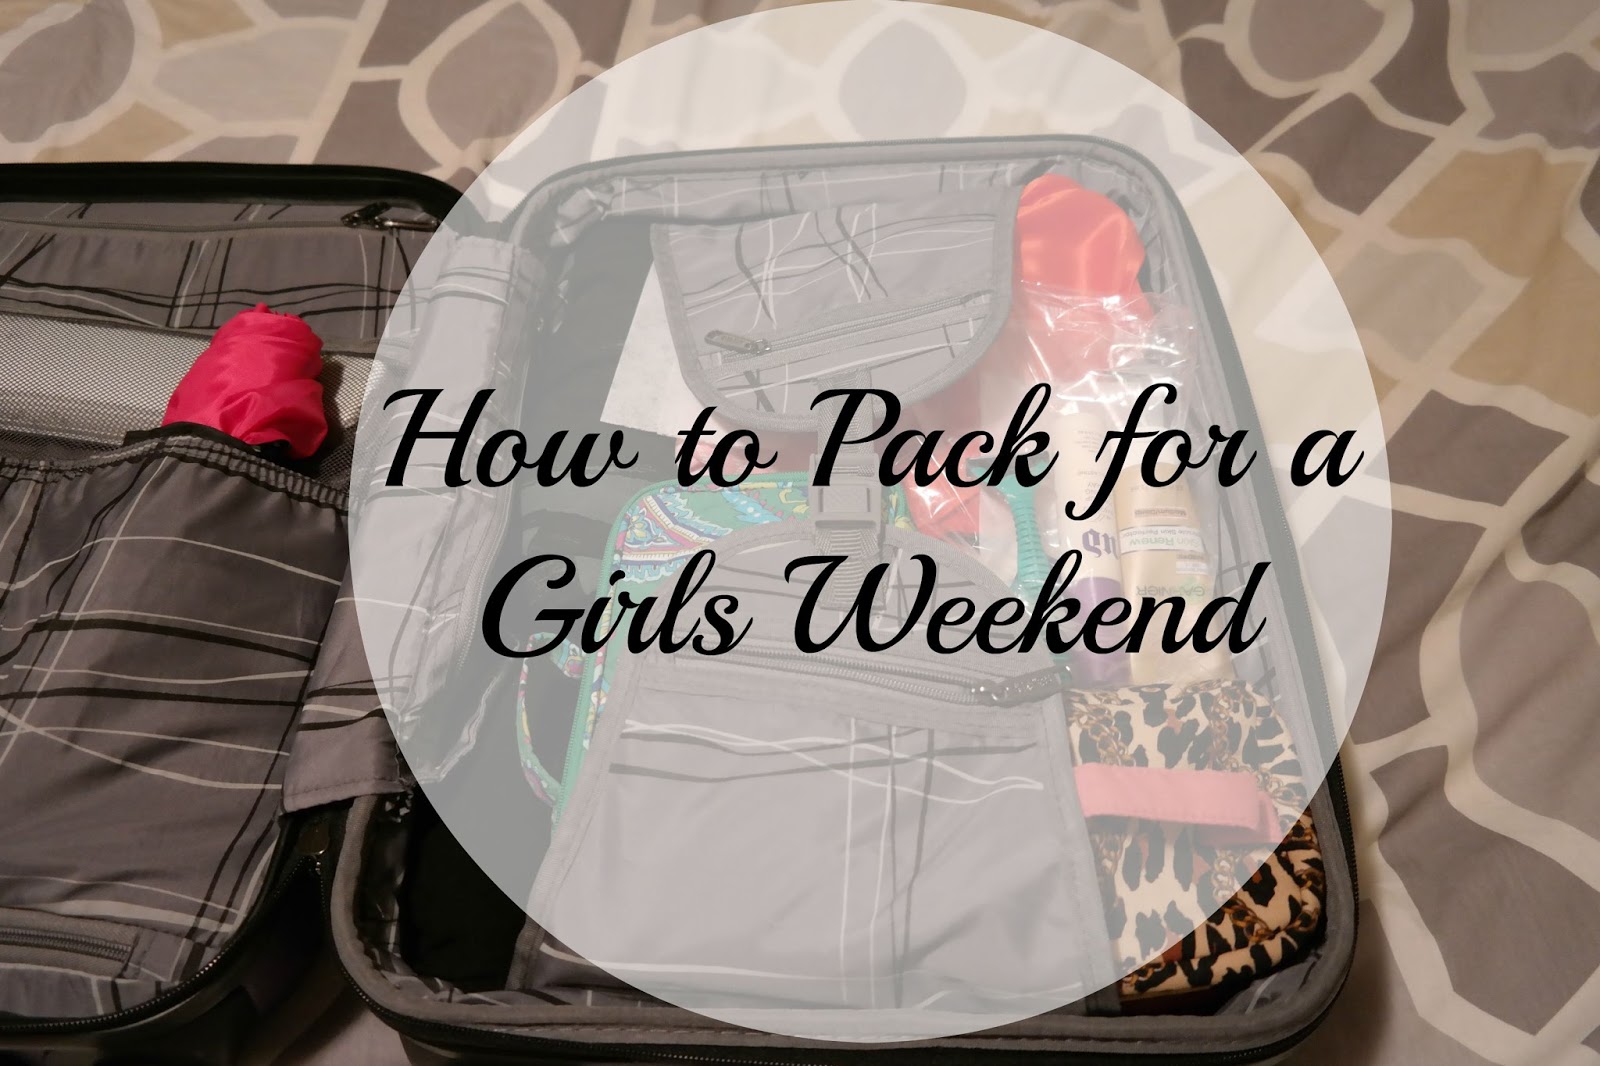 How to Pack for a Girls Weekend